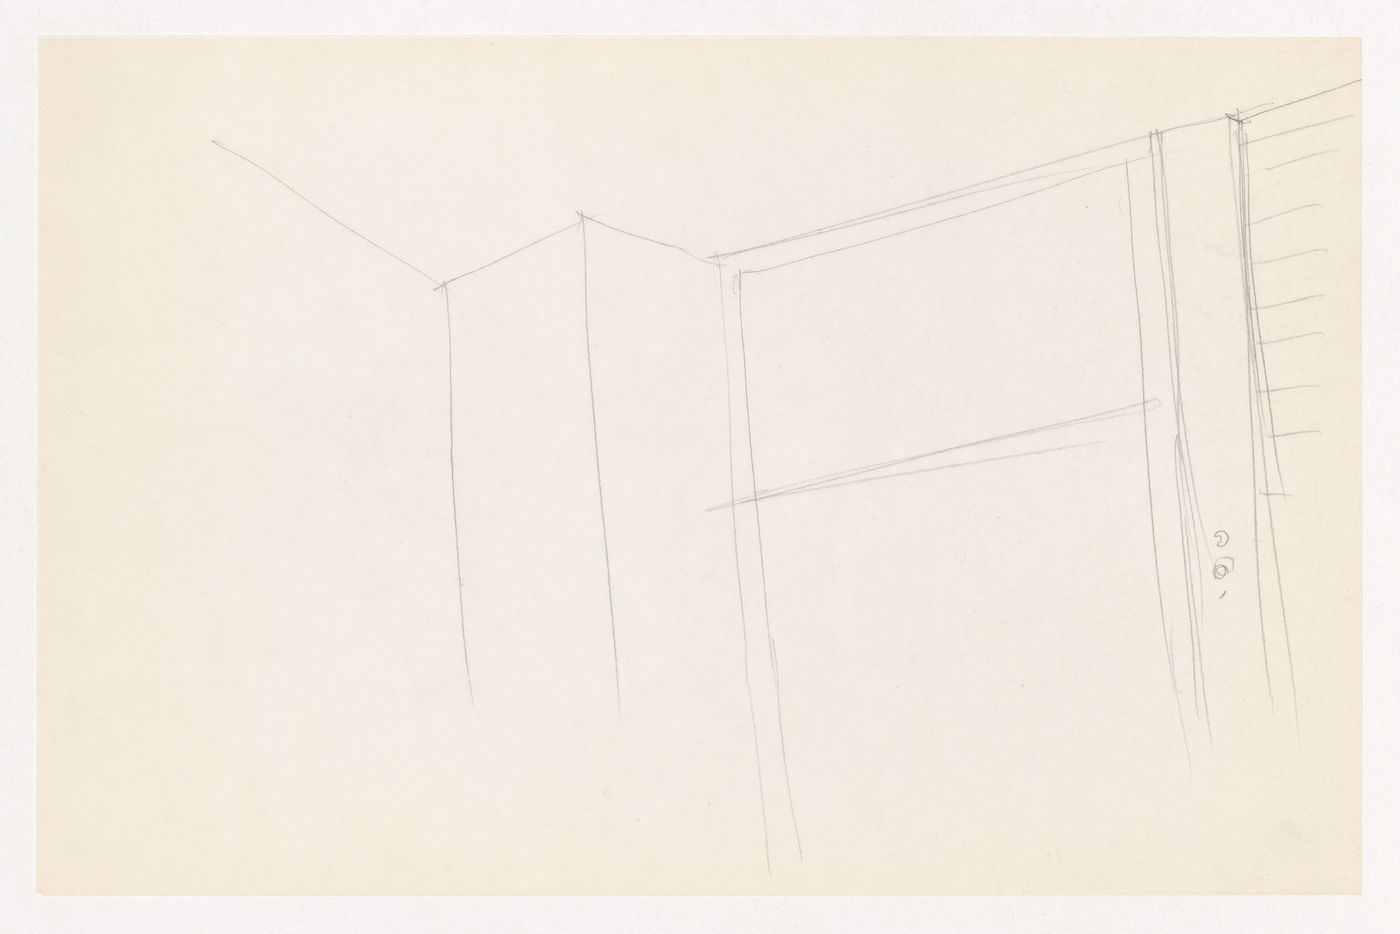 Interior perspective sketch, showing column, window mullion and wall connection, for the Metallurgy Building, Illinois Institute of Technology, Chicago